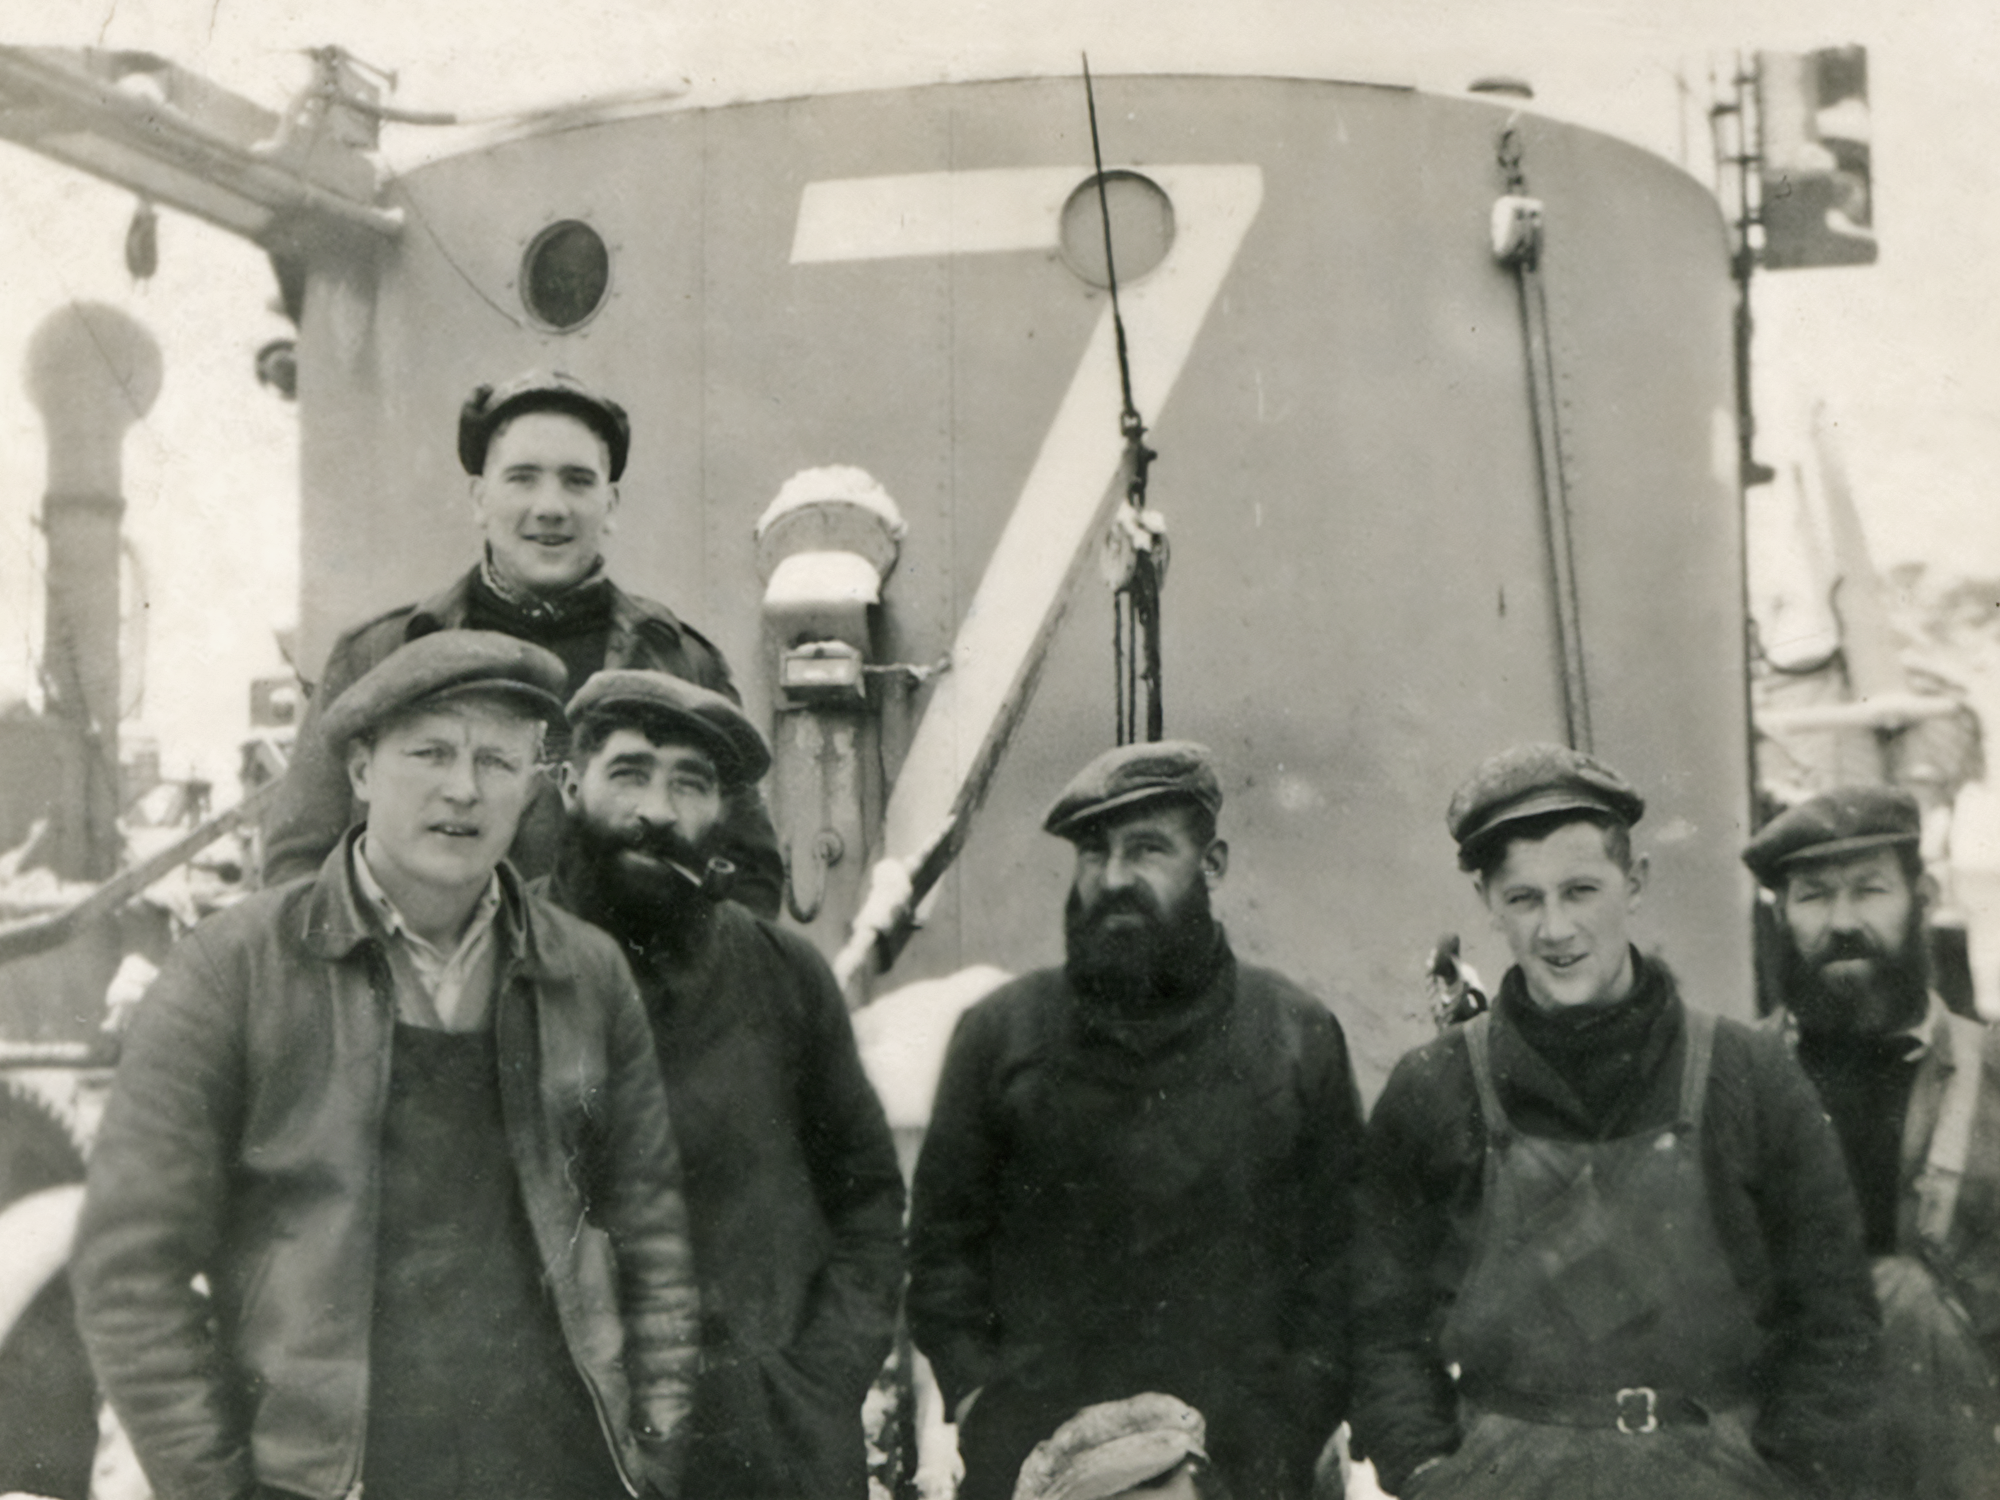 Black and white photo of six members of the crew on board a whaling ship